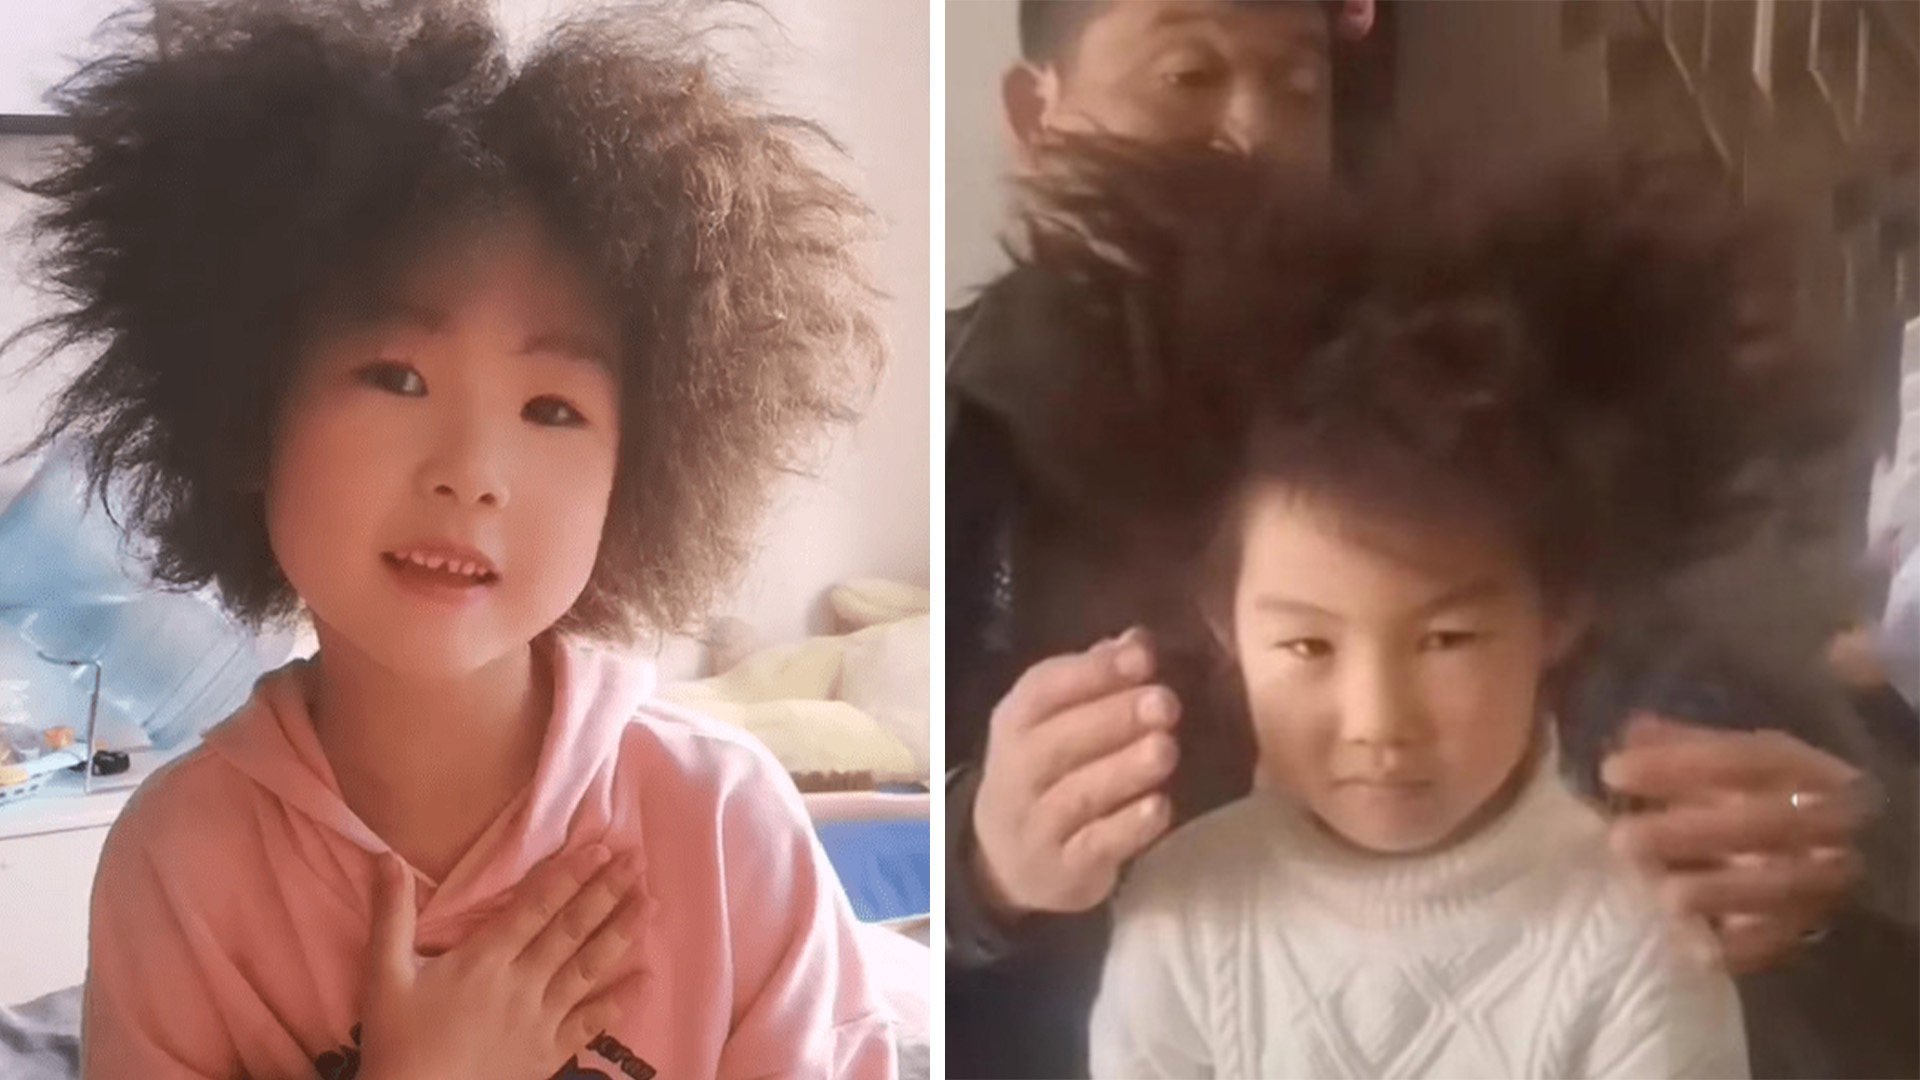 The bullying of a little girl with natural afro hair has left her not wanting to attend school, but she has received online support on social media. Photo: SCMP composite